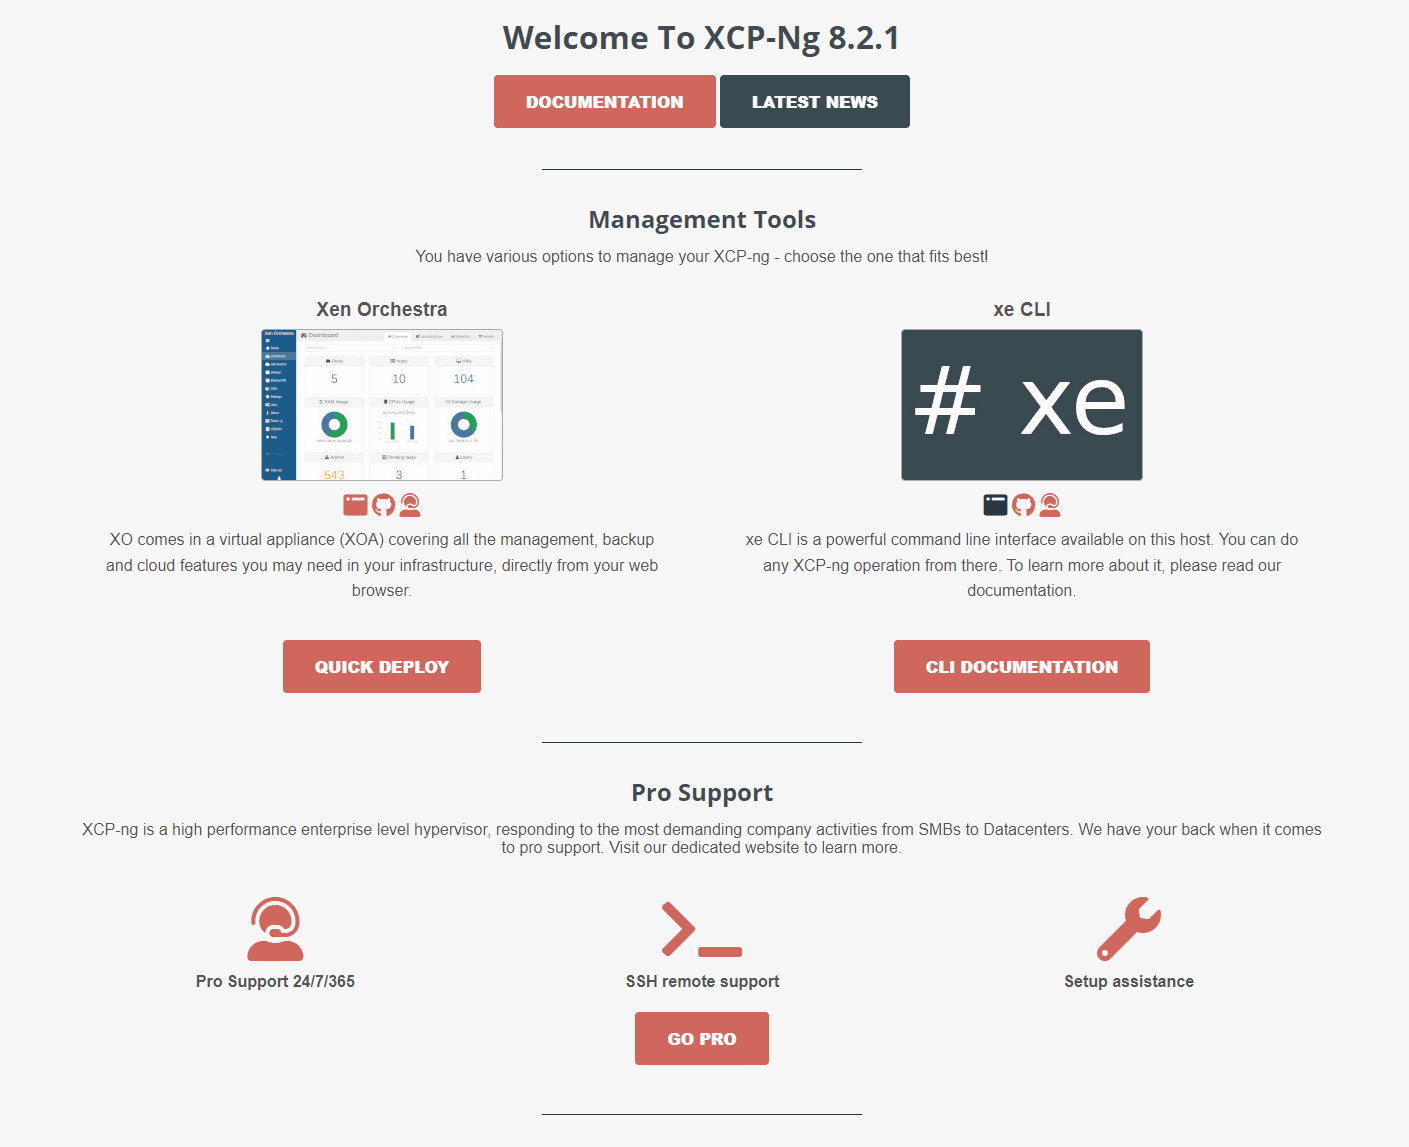 Viewing the web interface of your xcp ng host